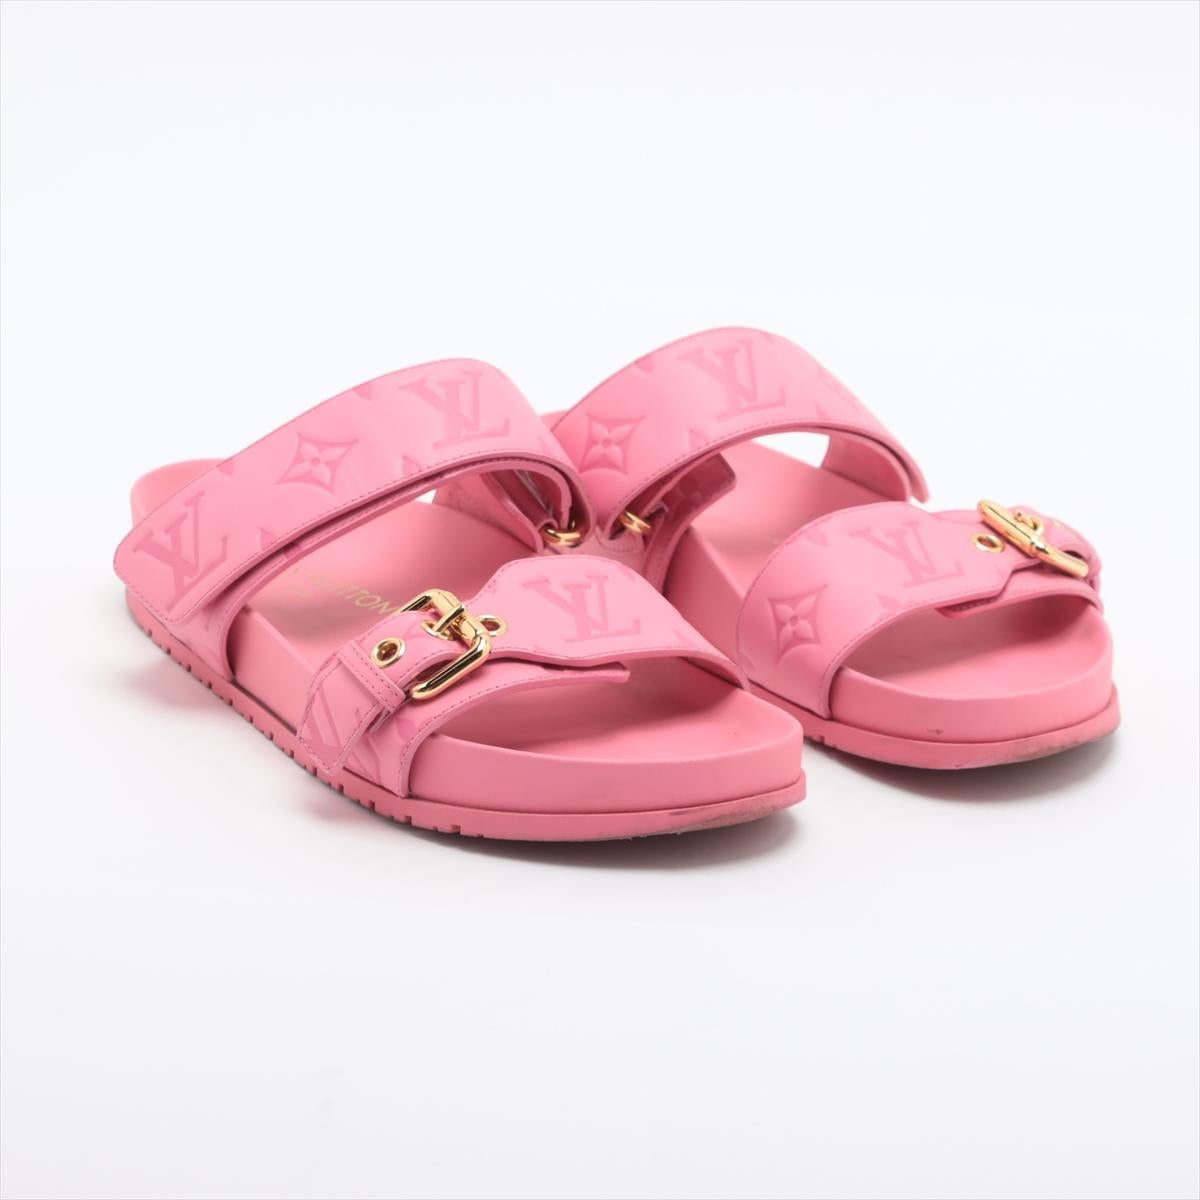 Louis Vuitton Bom Dia Flat Comfort Mule Pink In Good Condition For Sale In Indianapolis, IN